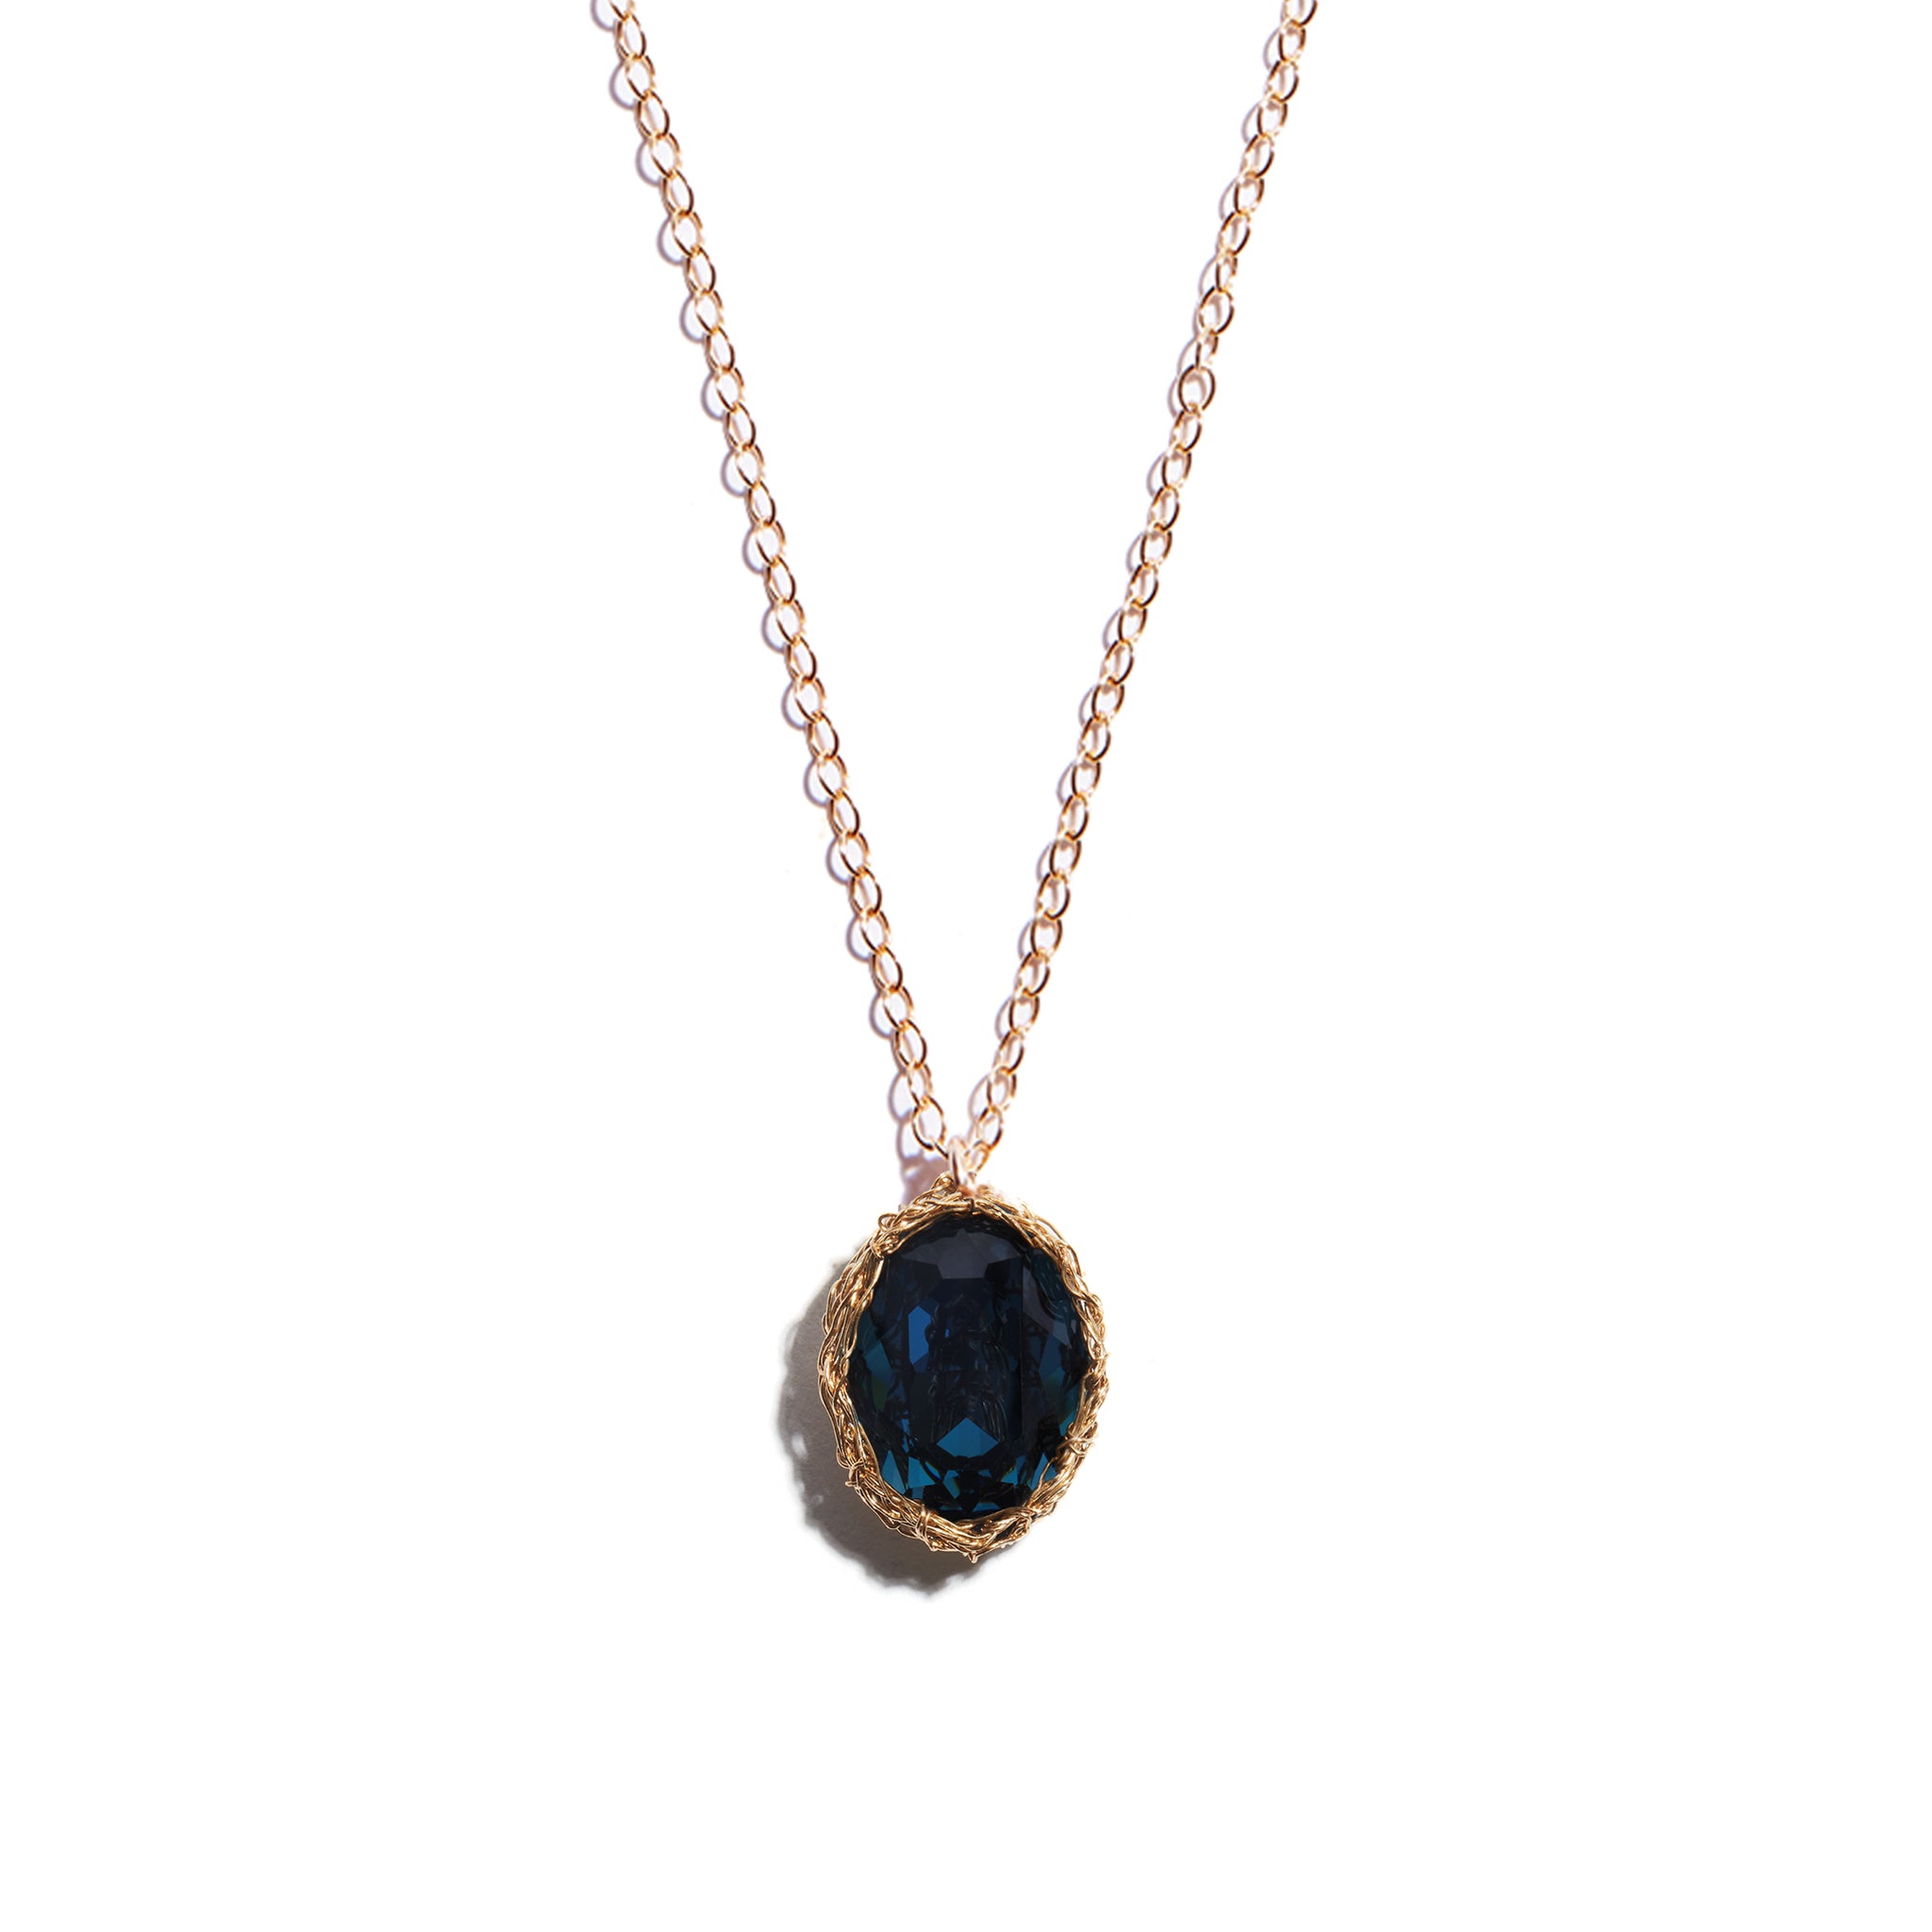 Close-up photo of a deep blue oval pendant crafted from 14 carat gold-filled metal. This sophisticated accessoty adds a touch of luxury to any attire.